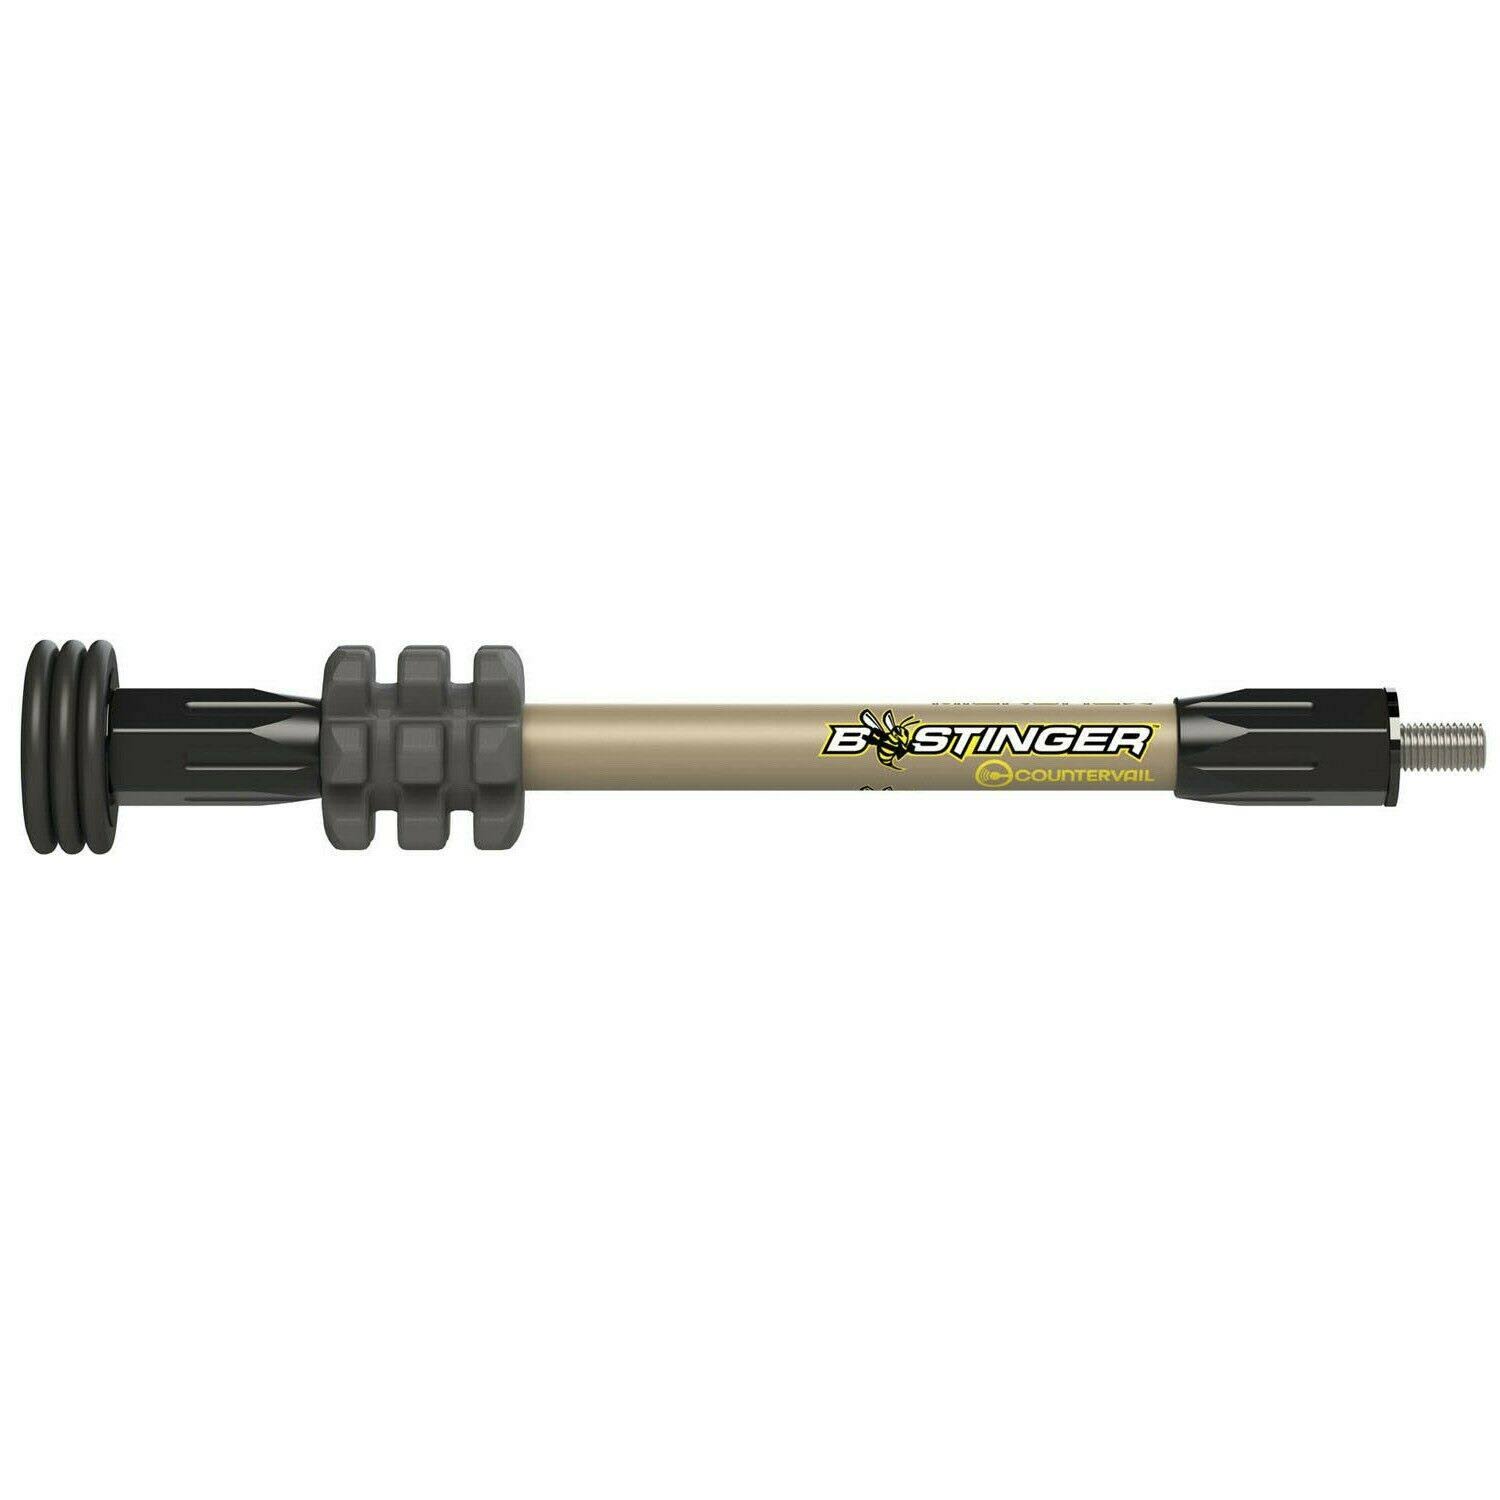 Bee Stinger Microhex Stabilizer - Tan, 10"